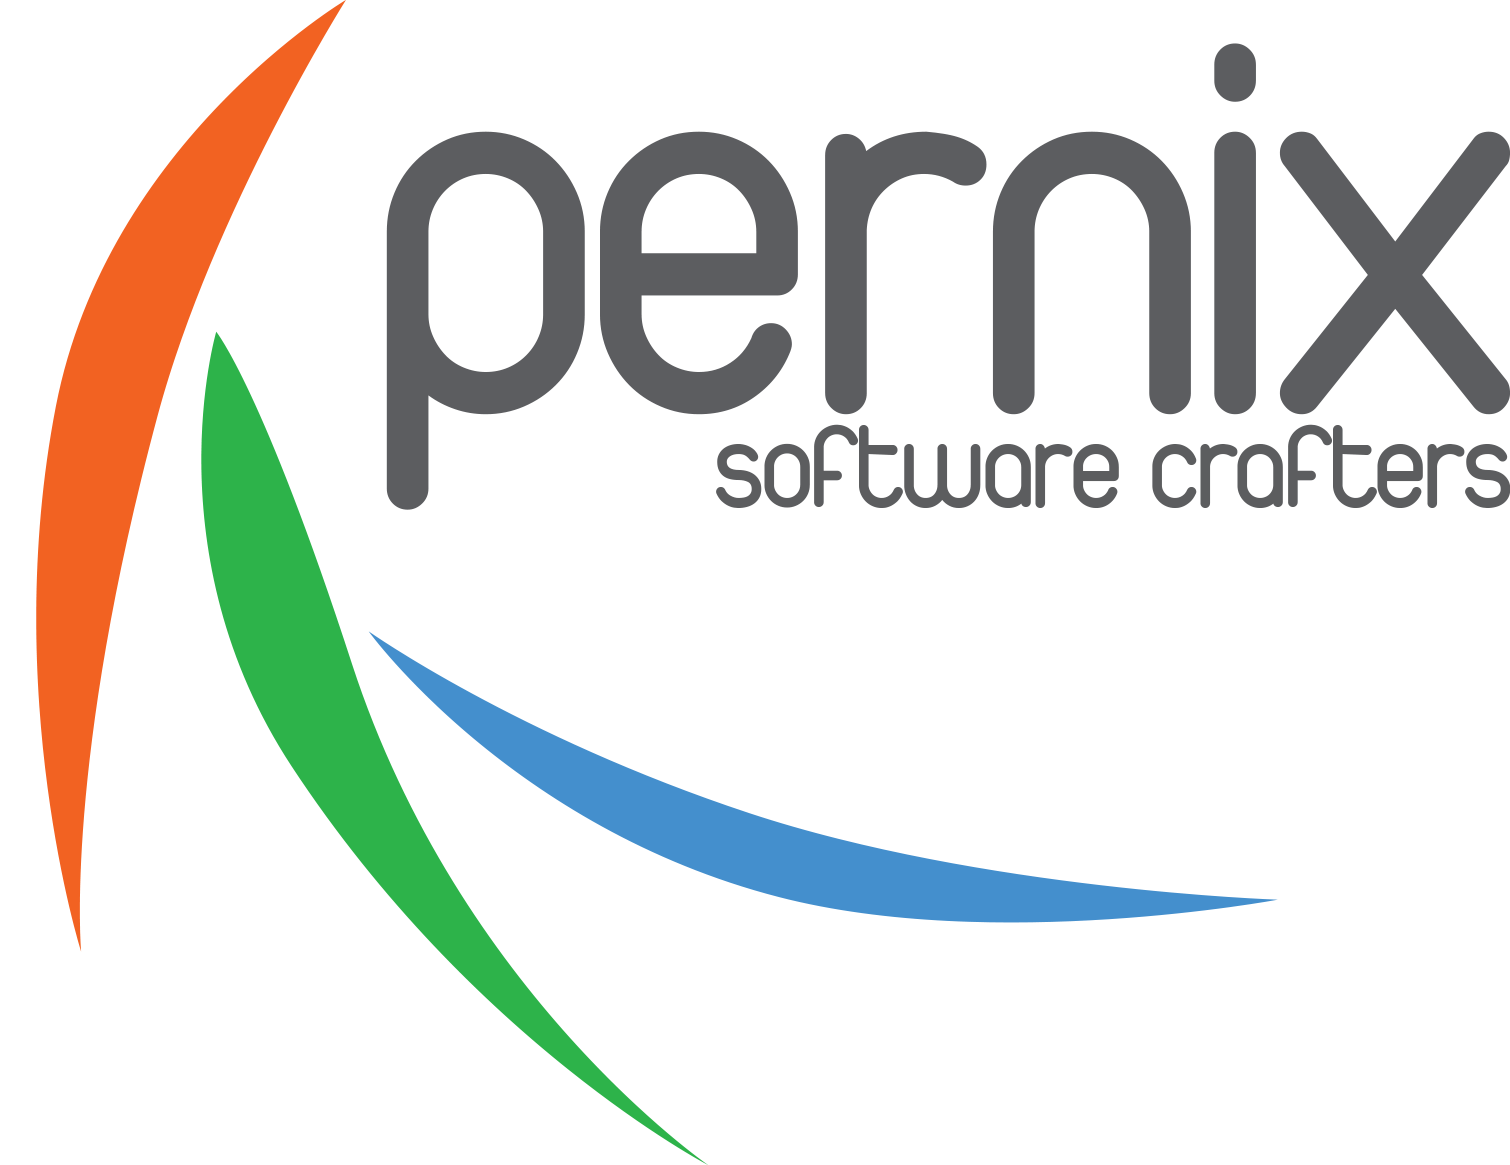 Pernix Solutions profile on Qualified.One